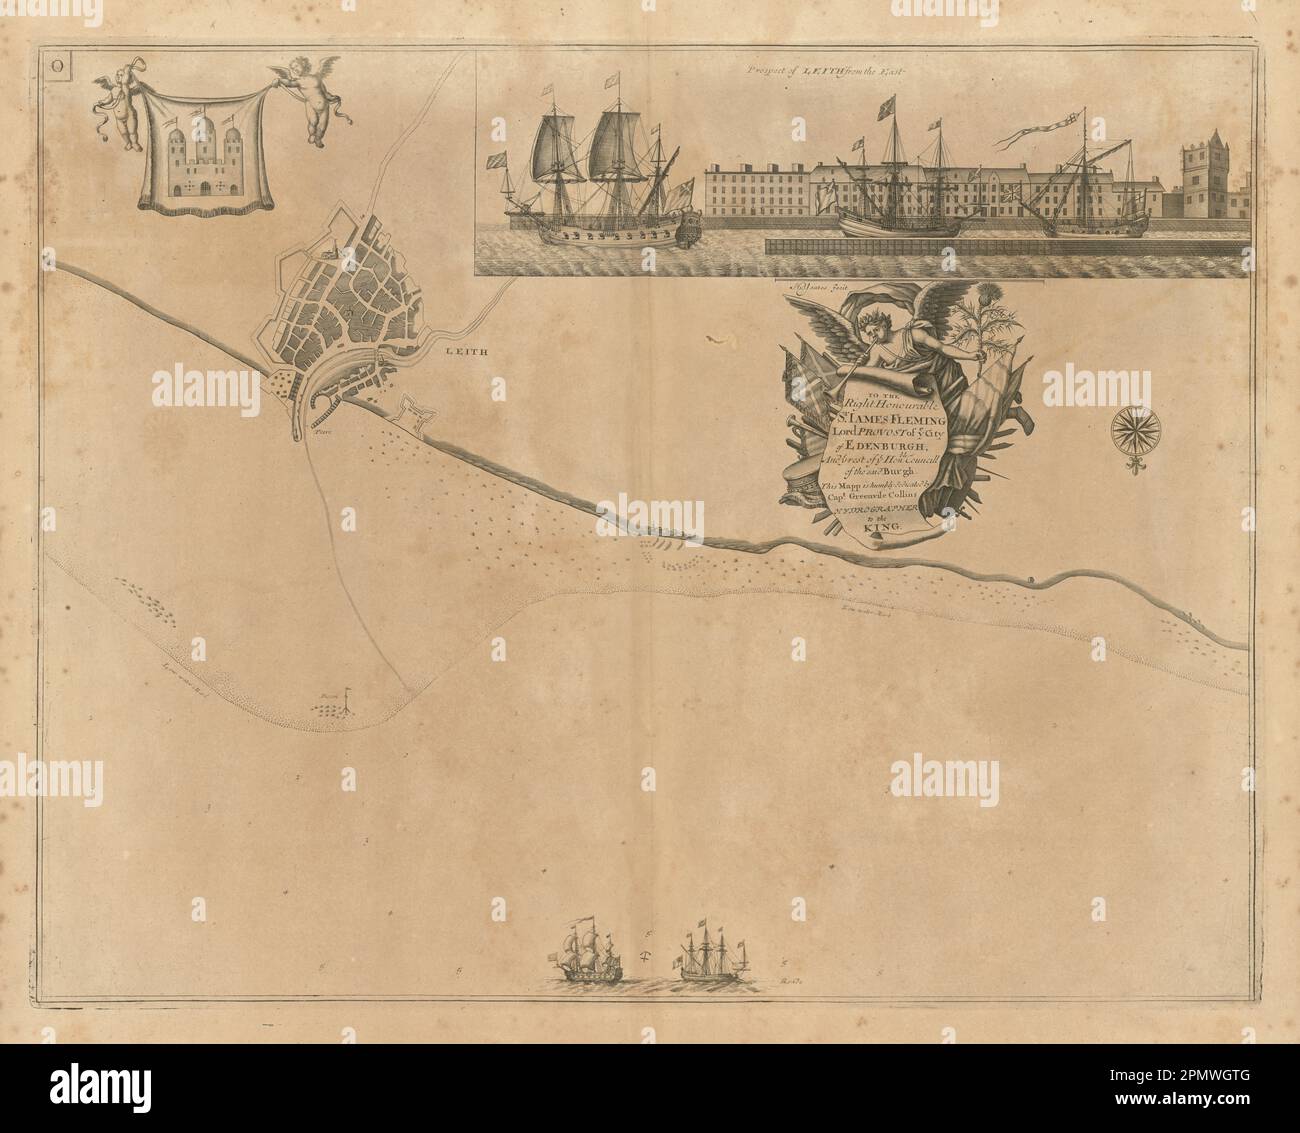 Navigation chart & view of LEITH, by Capt Greenvile COLLINS. Edinburgh 1693 map Stock Photo